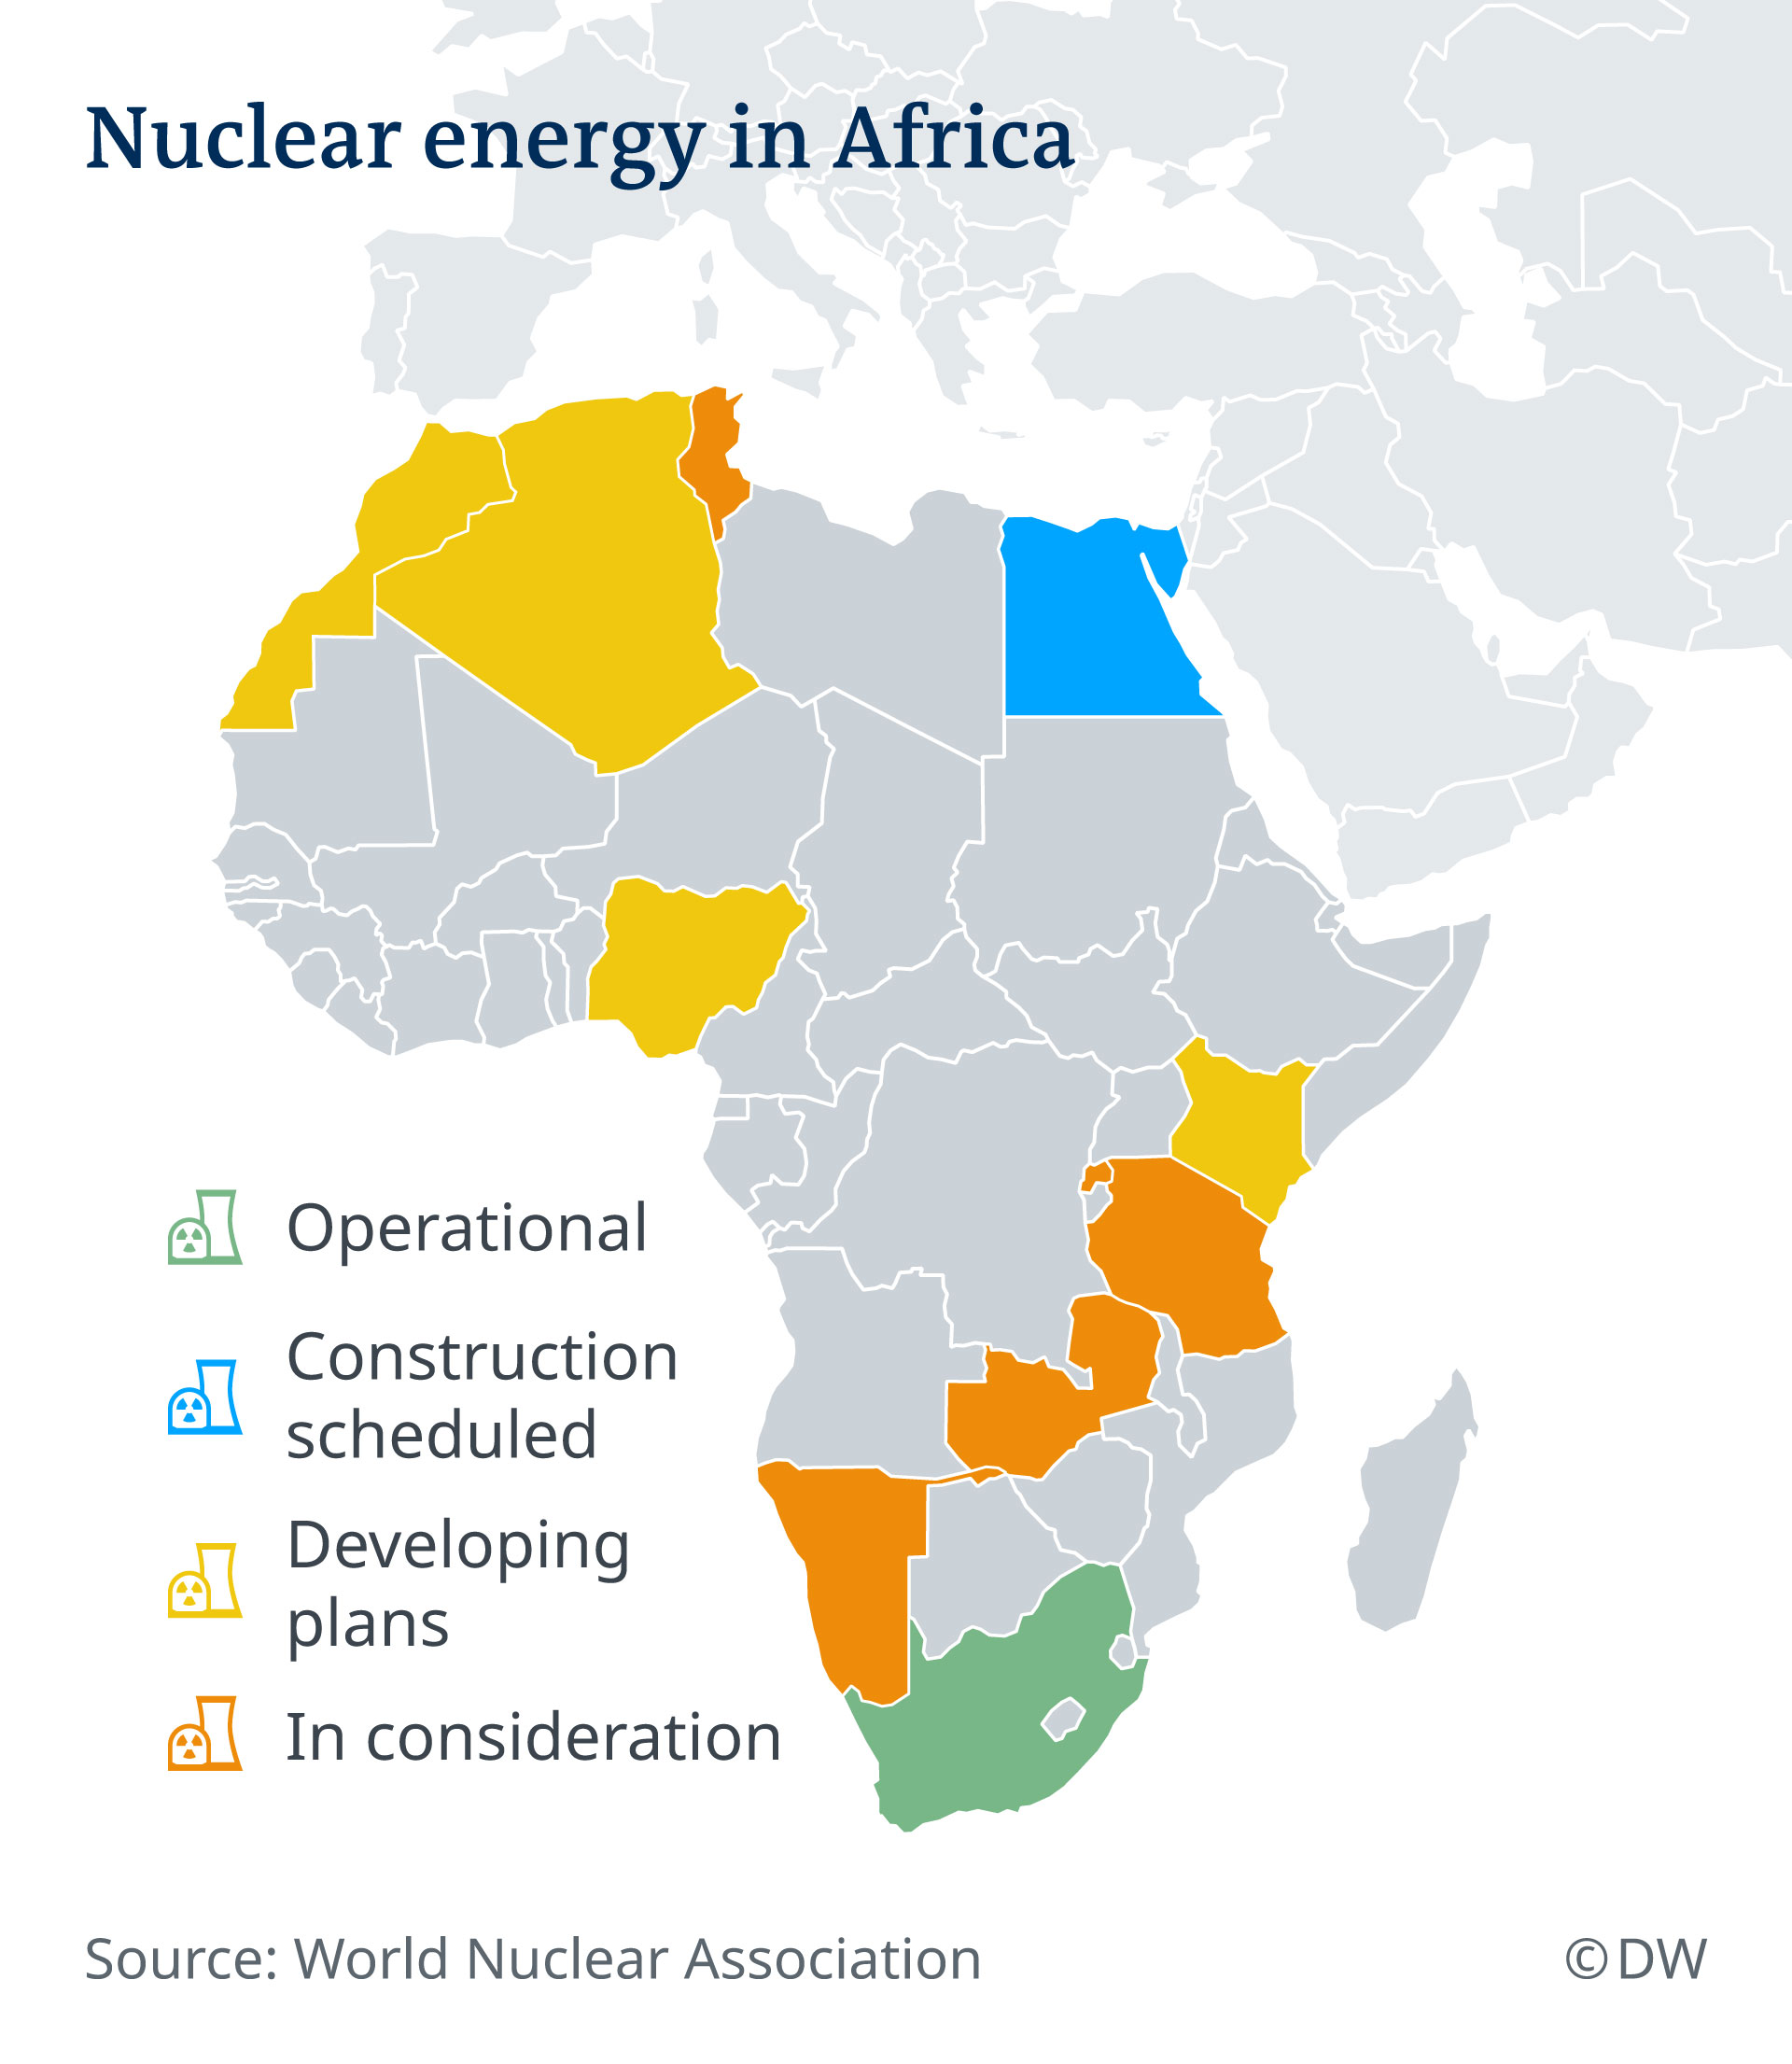 Different stages of nuclear energy in Africa, based on information from the World Nuclear Association